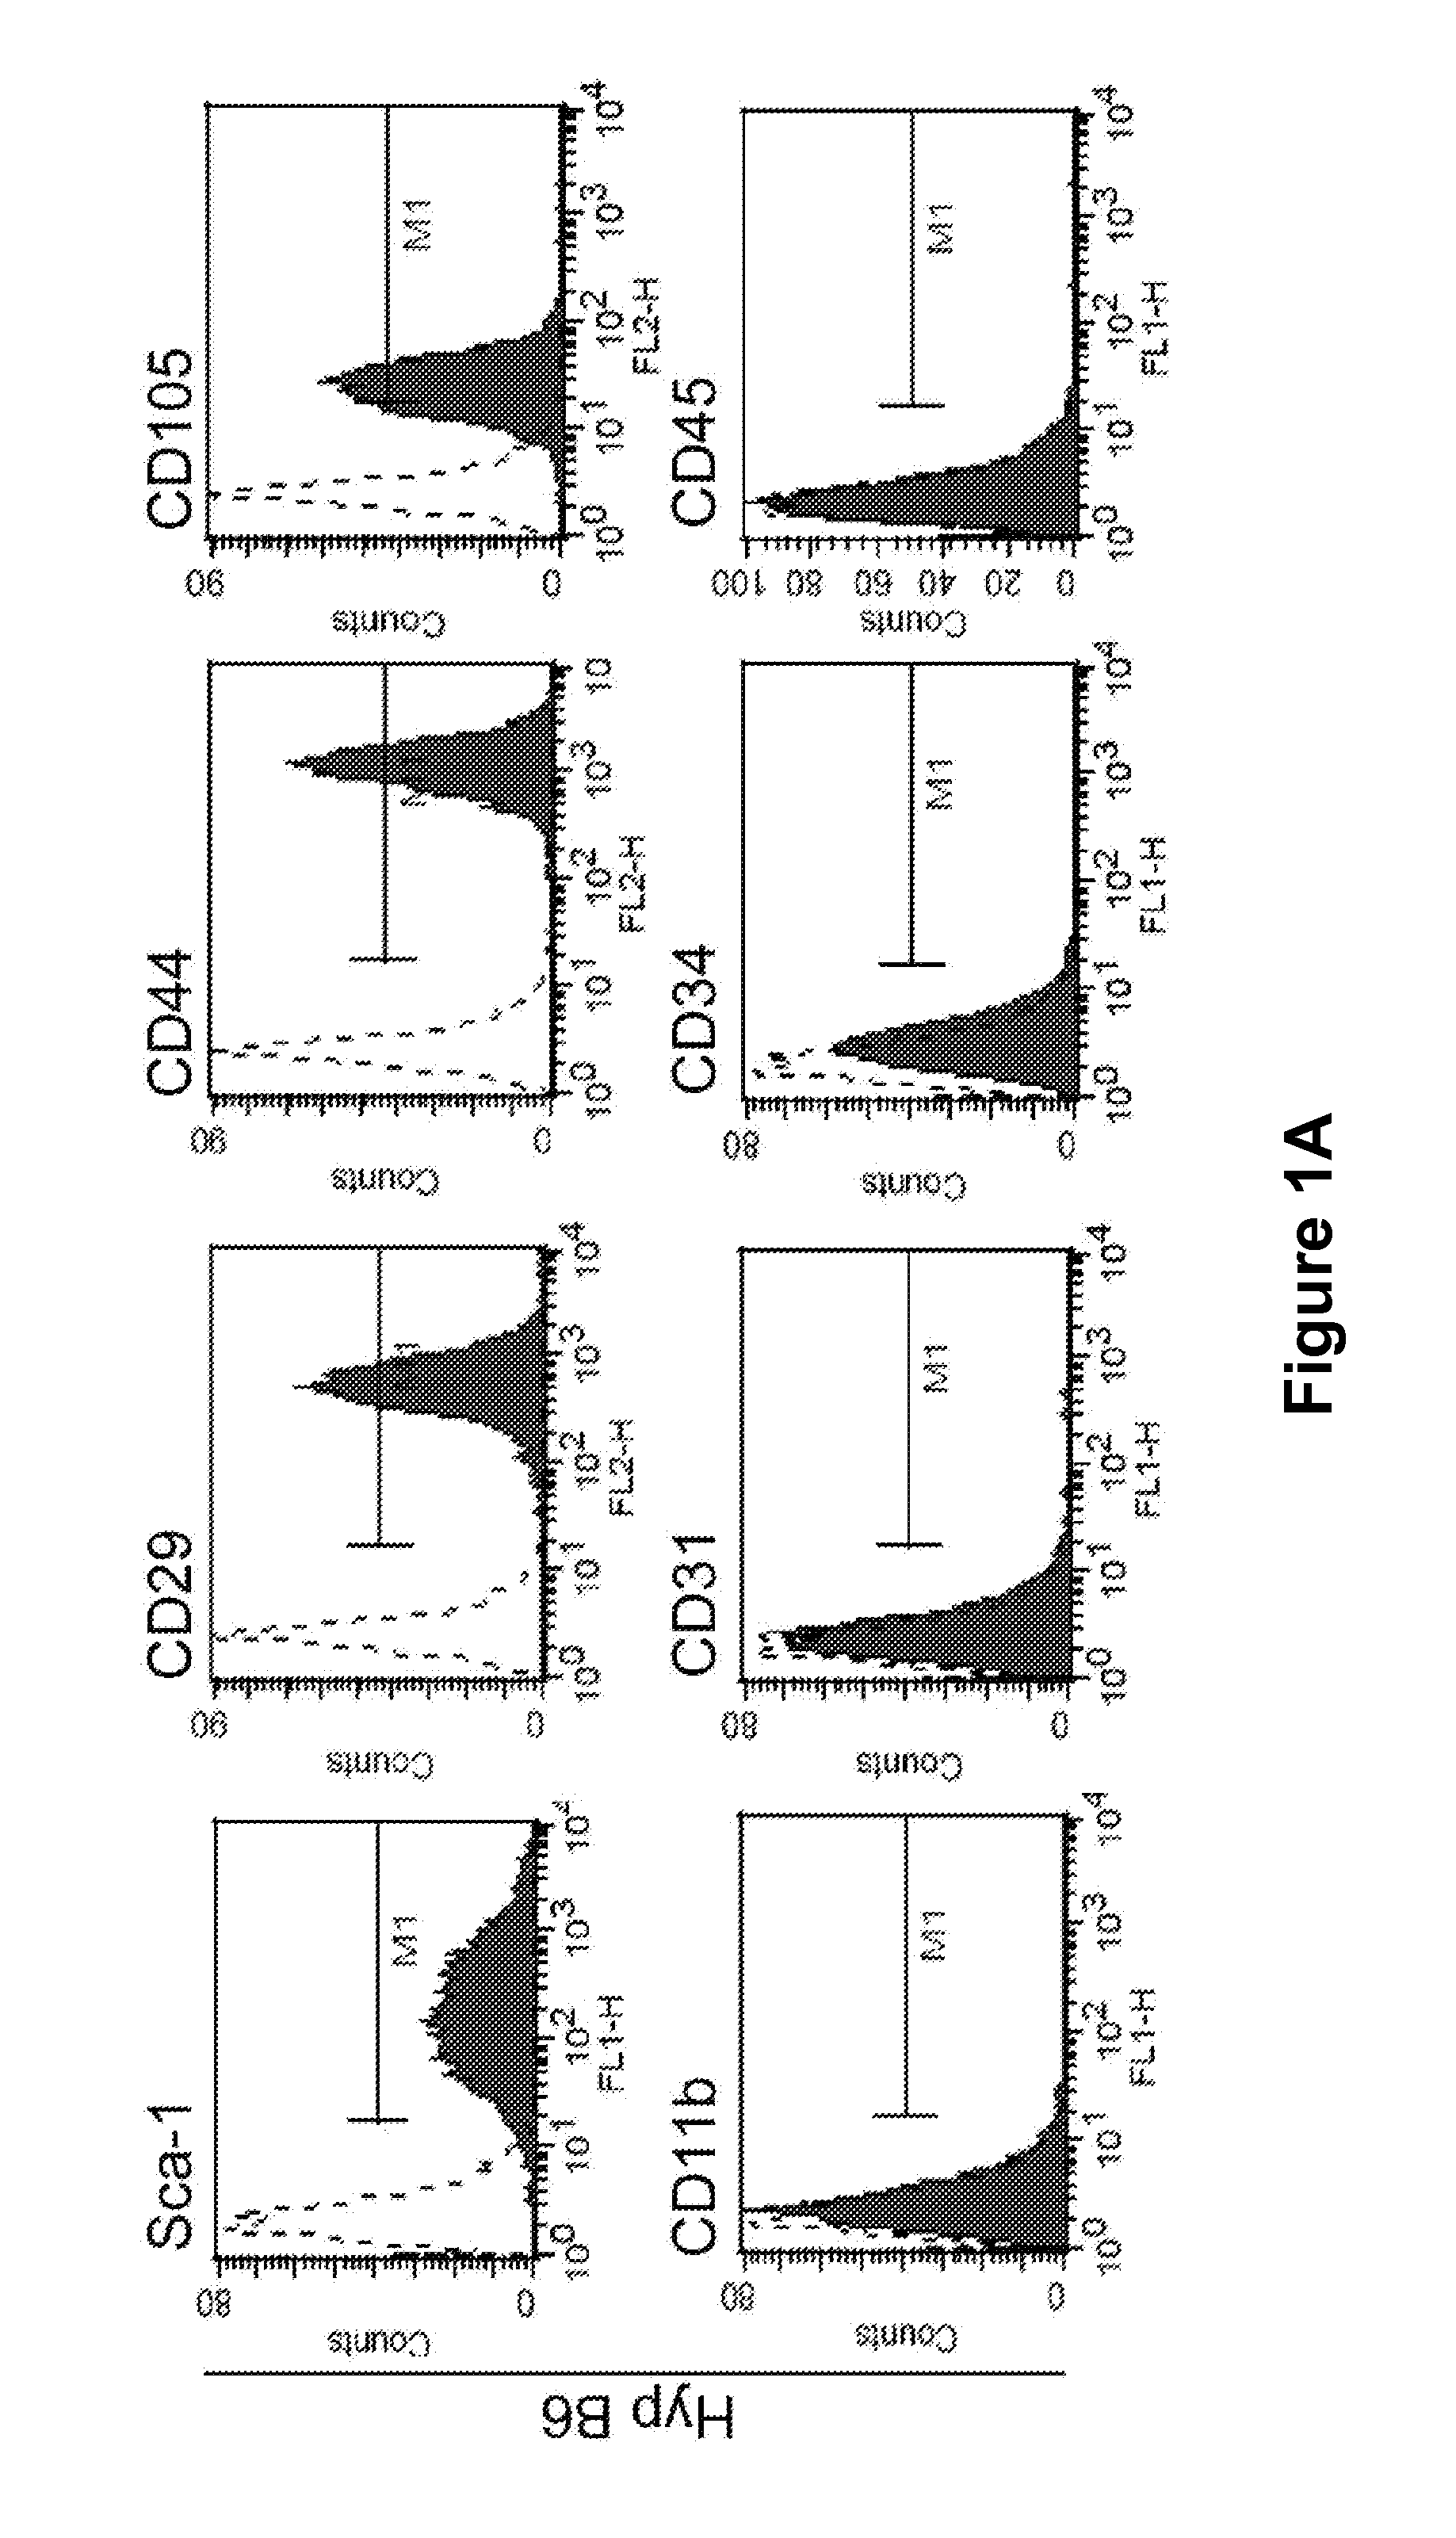 Method for reducing rejection of allogeneic cell transplant